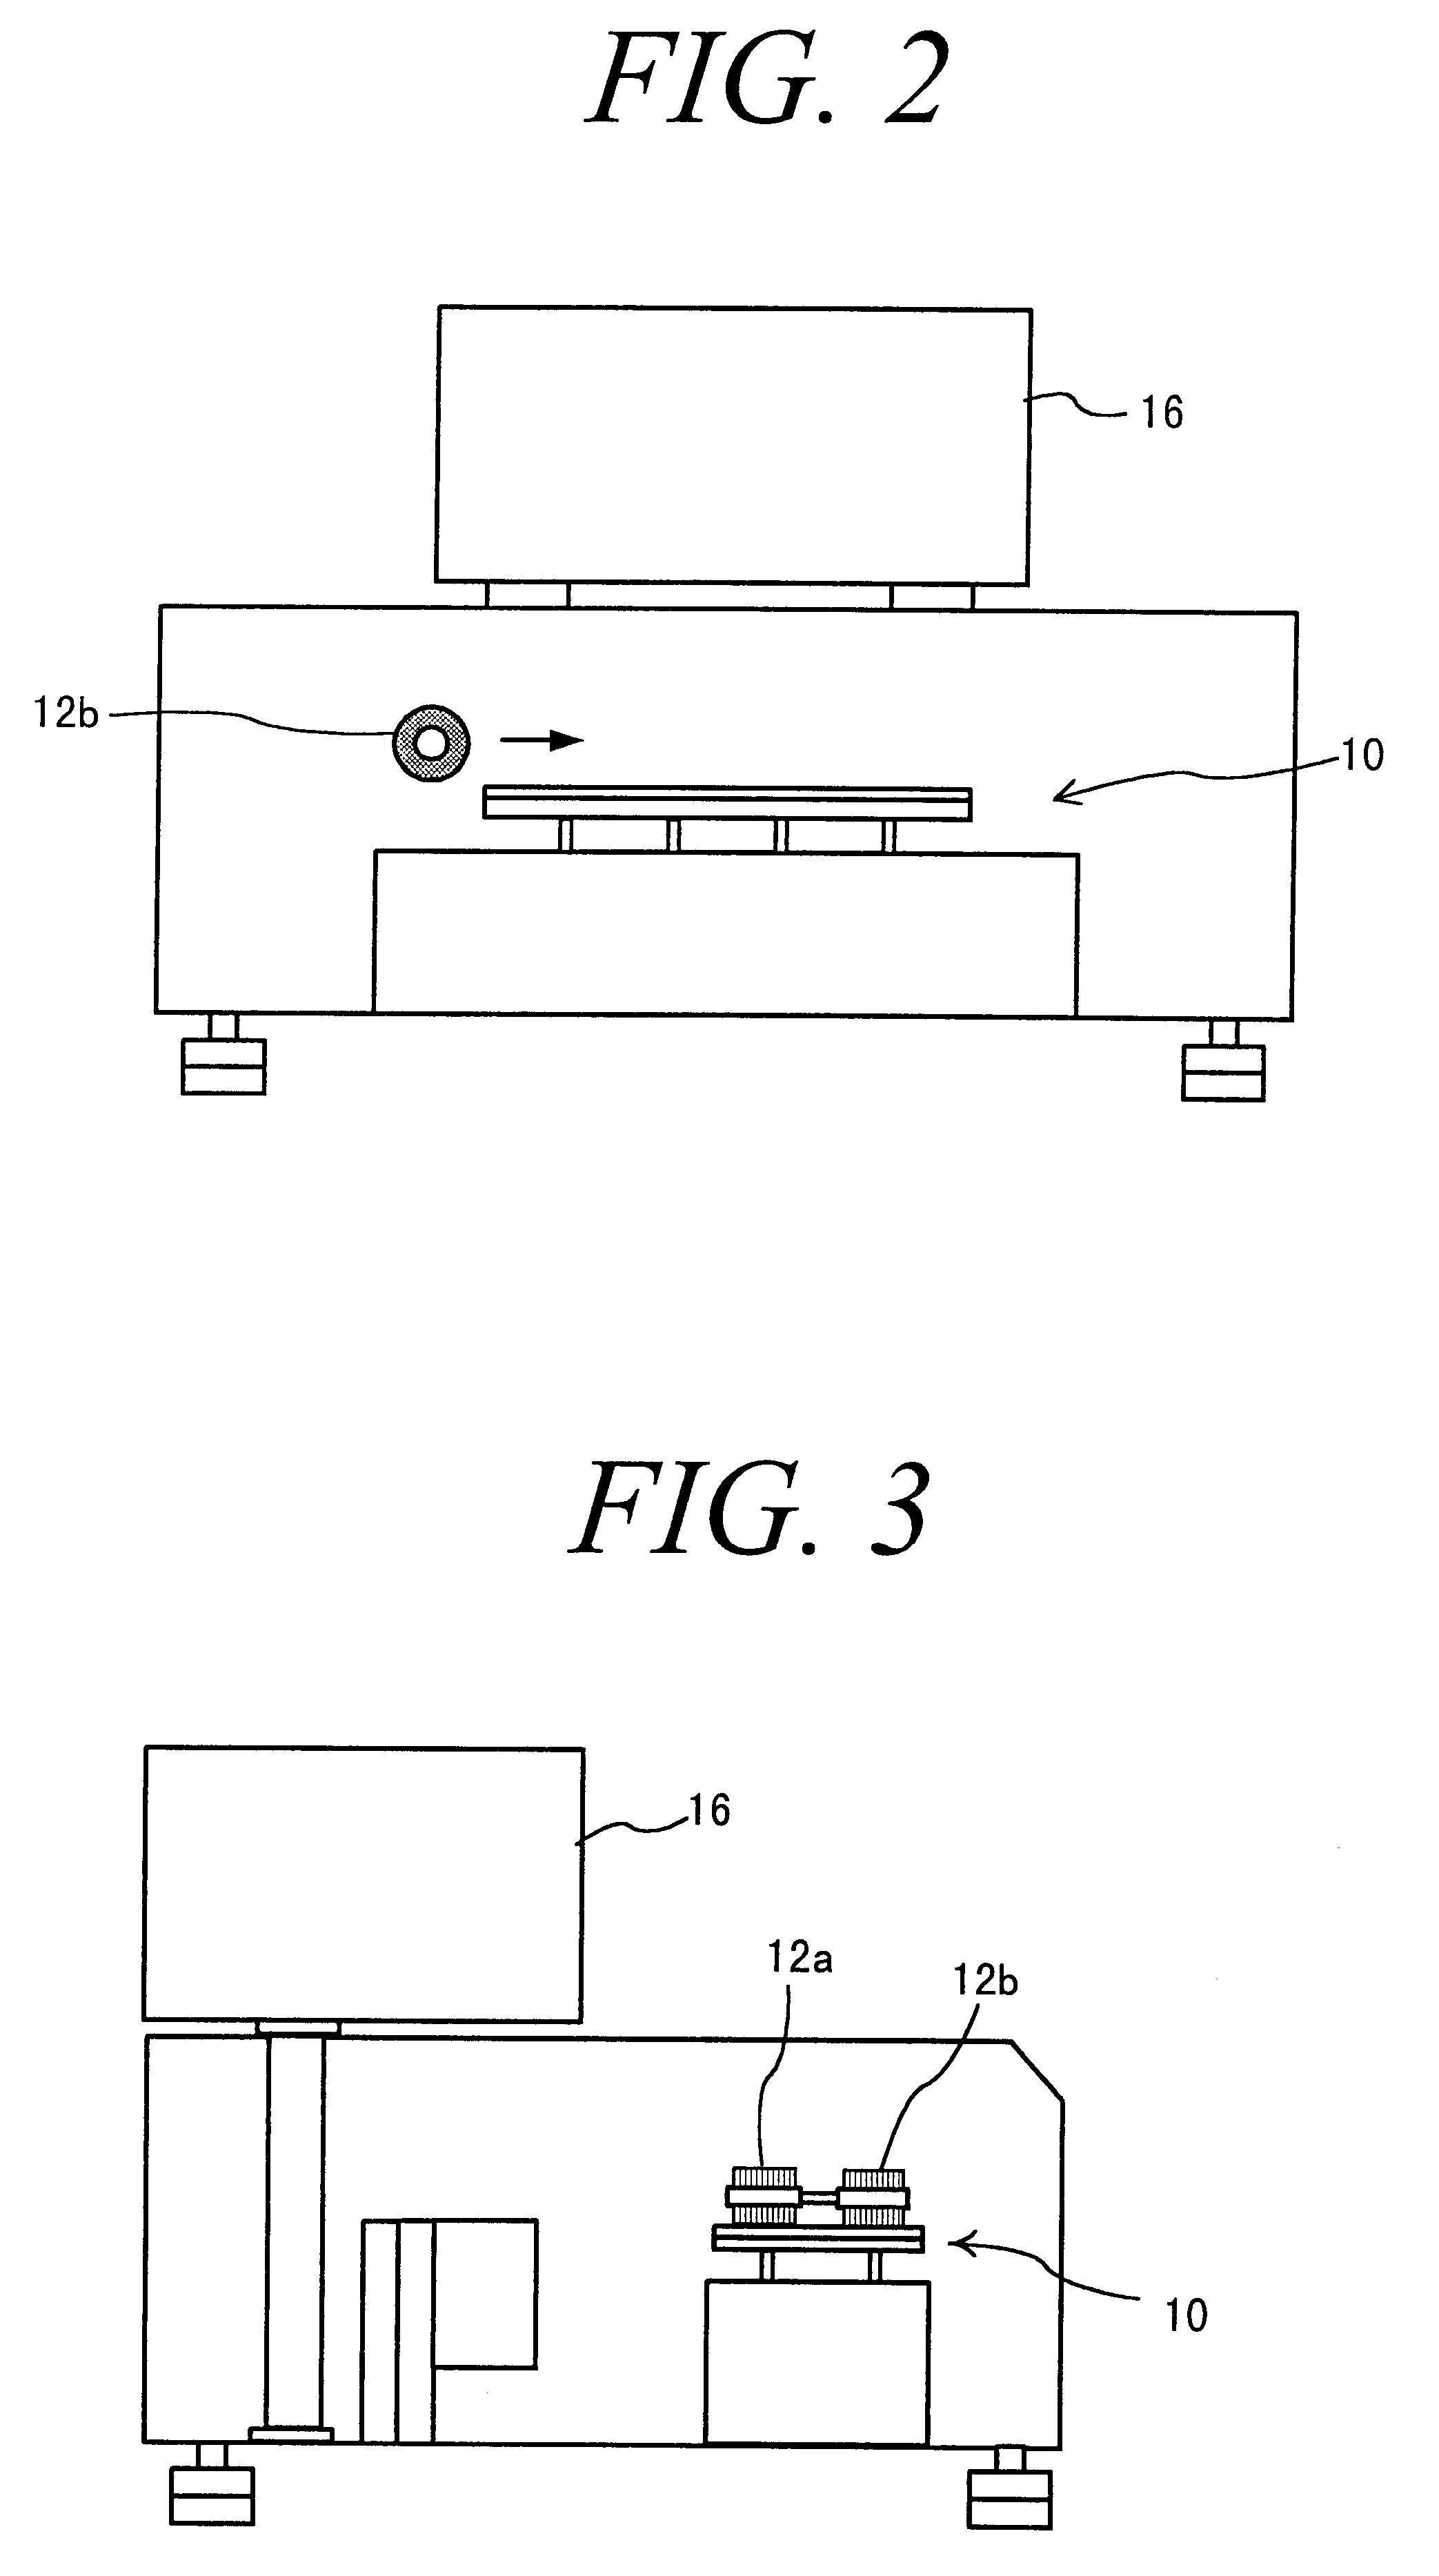 Apparatus for polishing leads of a semiconductor package